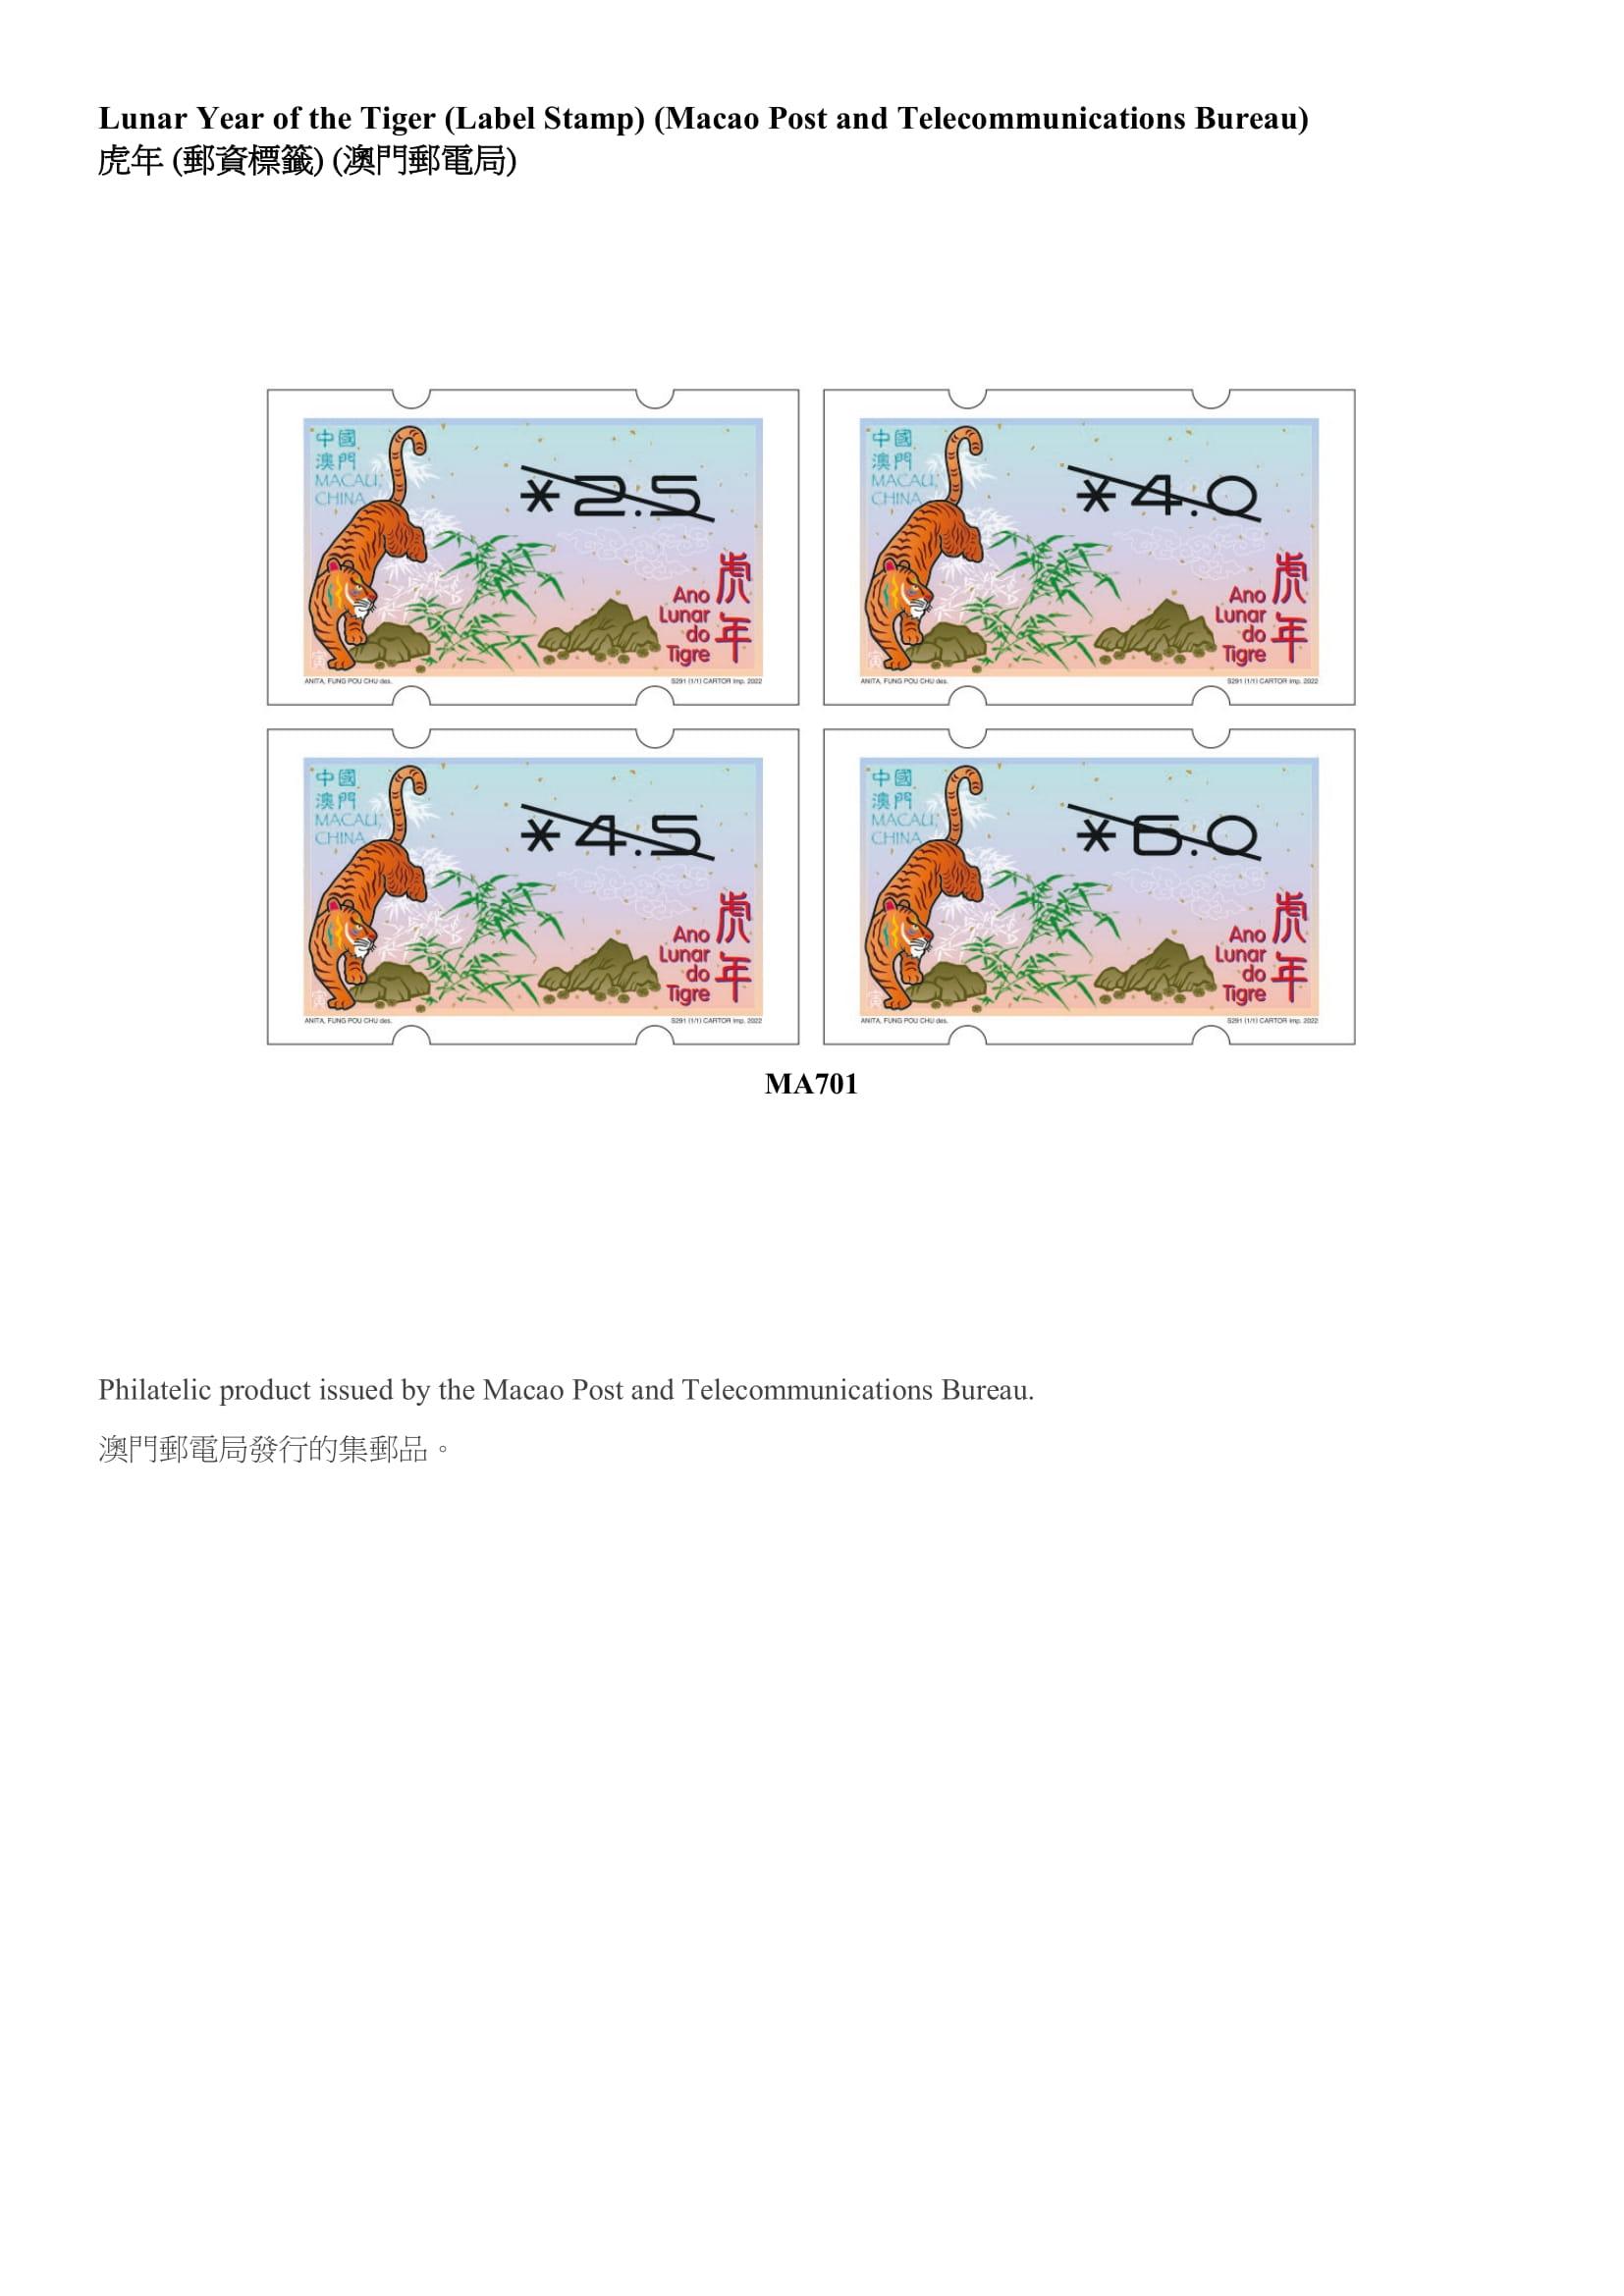 Hongkong Post announced today (March 4) that selected philatelic products issued by China Post, the Macao Post and Telecommunications Bureau and the overseas postal administrations of Australia, Isle of Man, Liechtenstein, New Zealand, the United Kingdom and the United Nations, will be put on sale at the Hongkong Post online shopping mall ShopThruPost starting from 8am on March 11. Picture shows philatelic products issued by the Macao Post and Telecommunications Bureau.